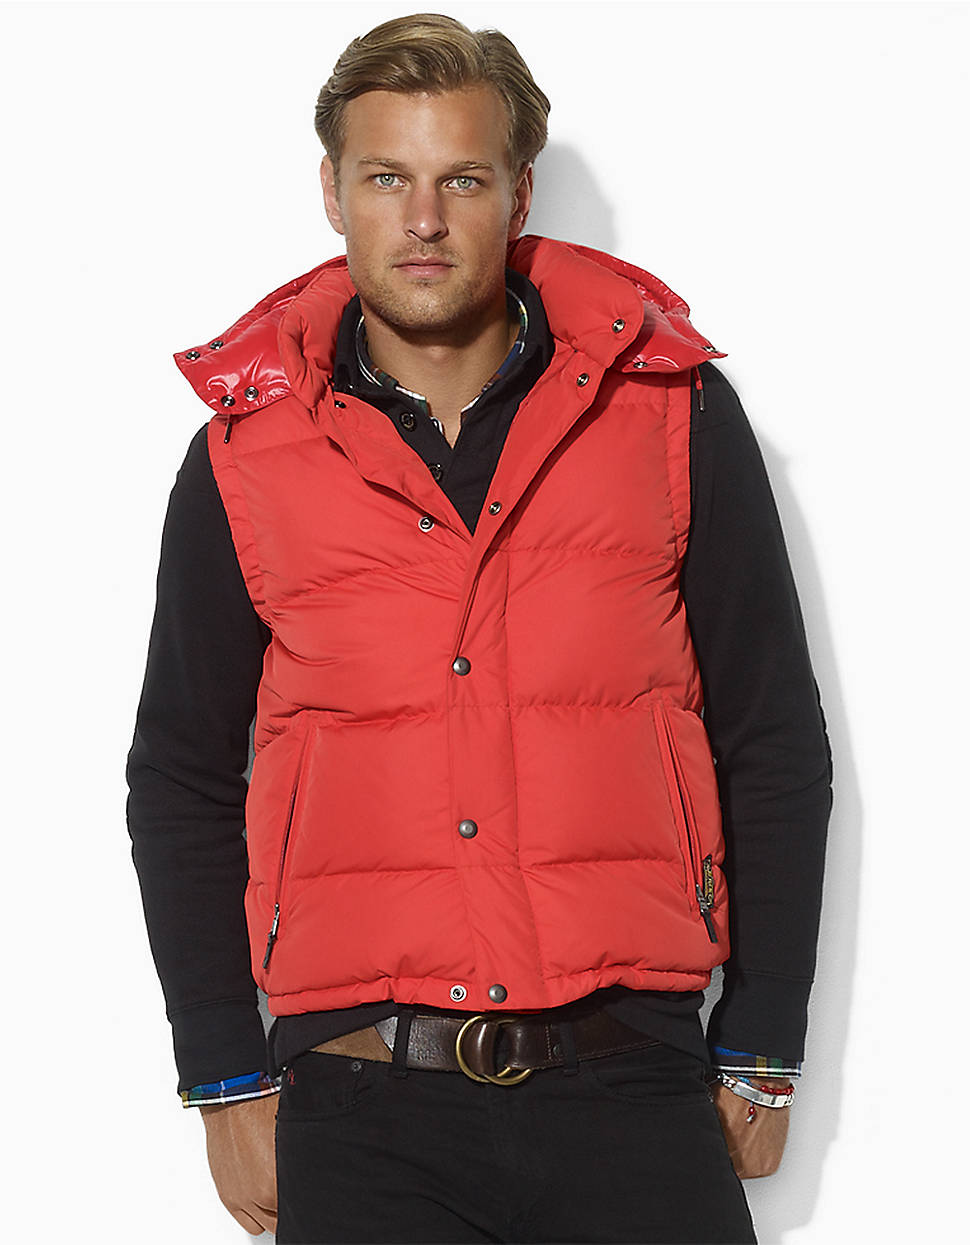 Polo Ralph Lauren Apres Hooded Packable Puffer Vest in Red for Men - Lyst